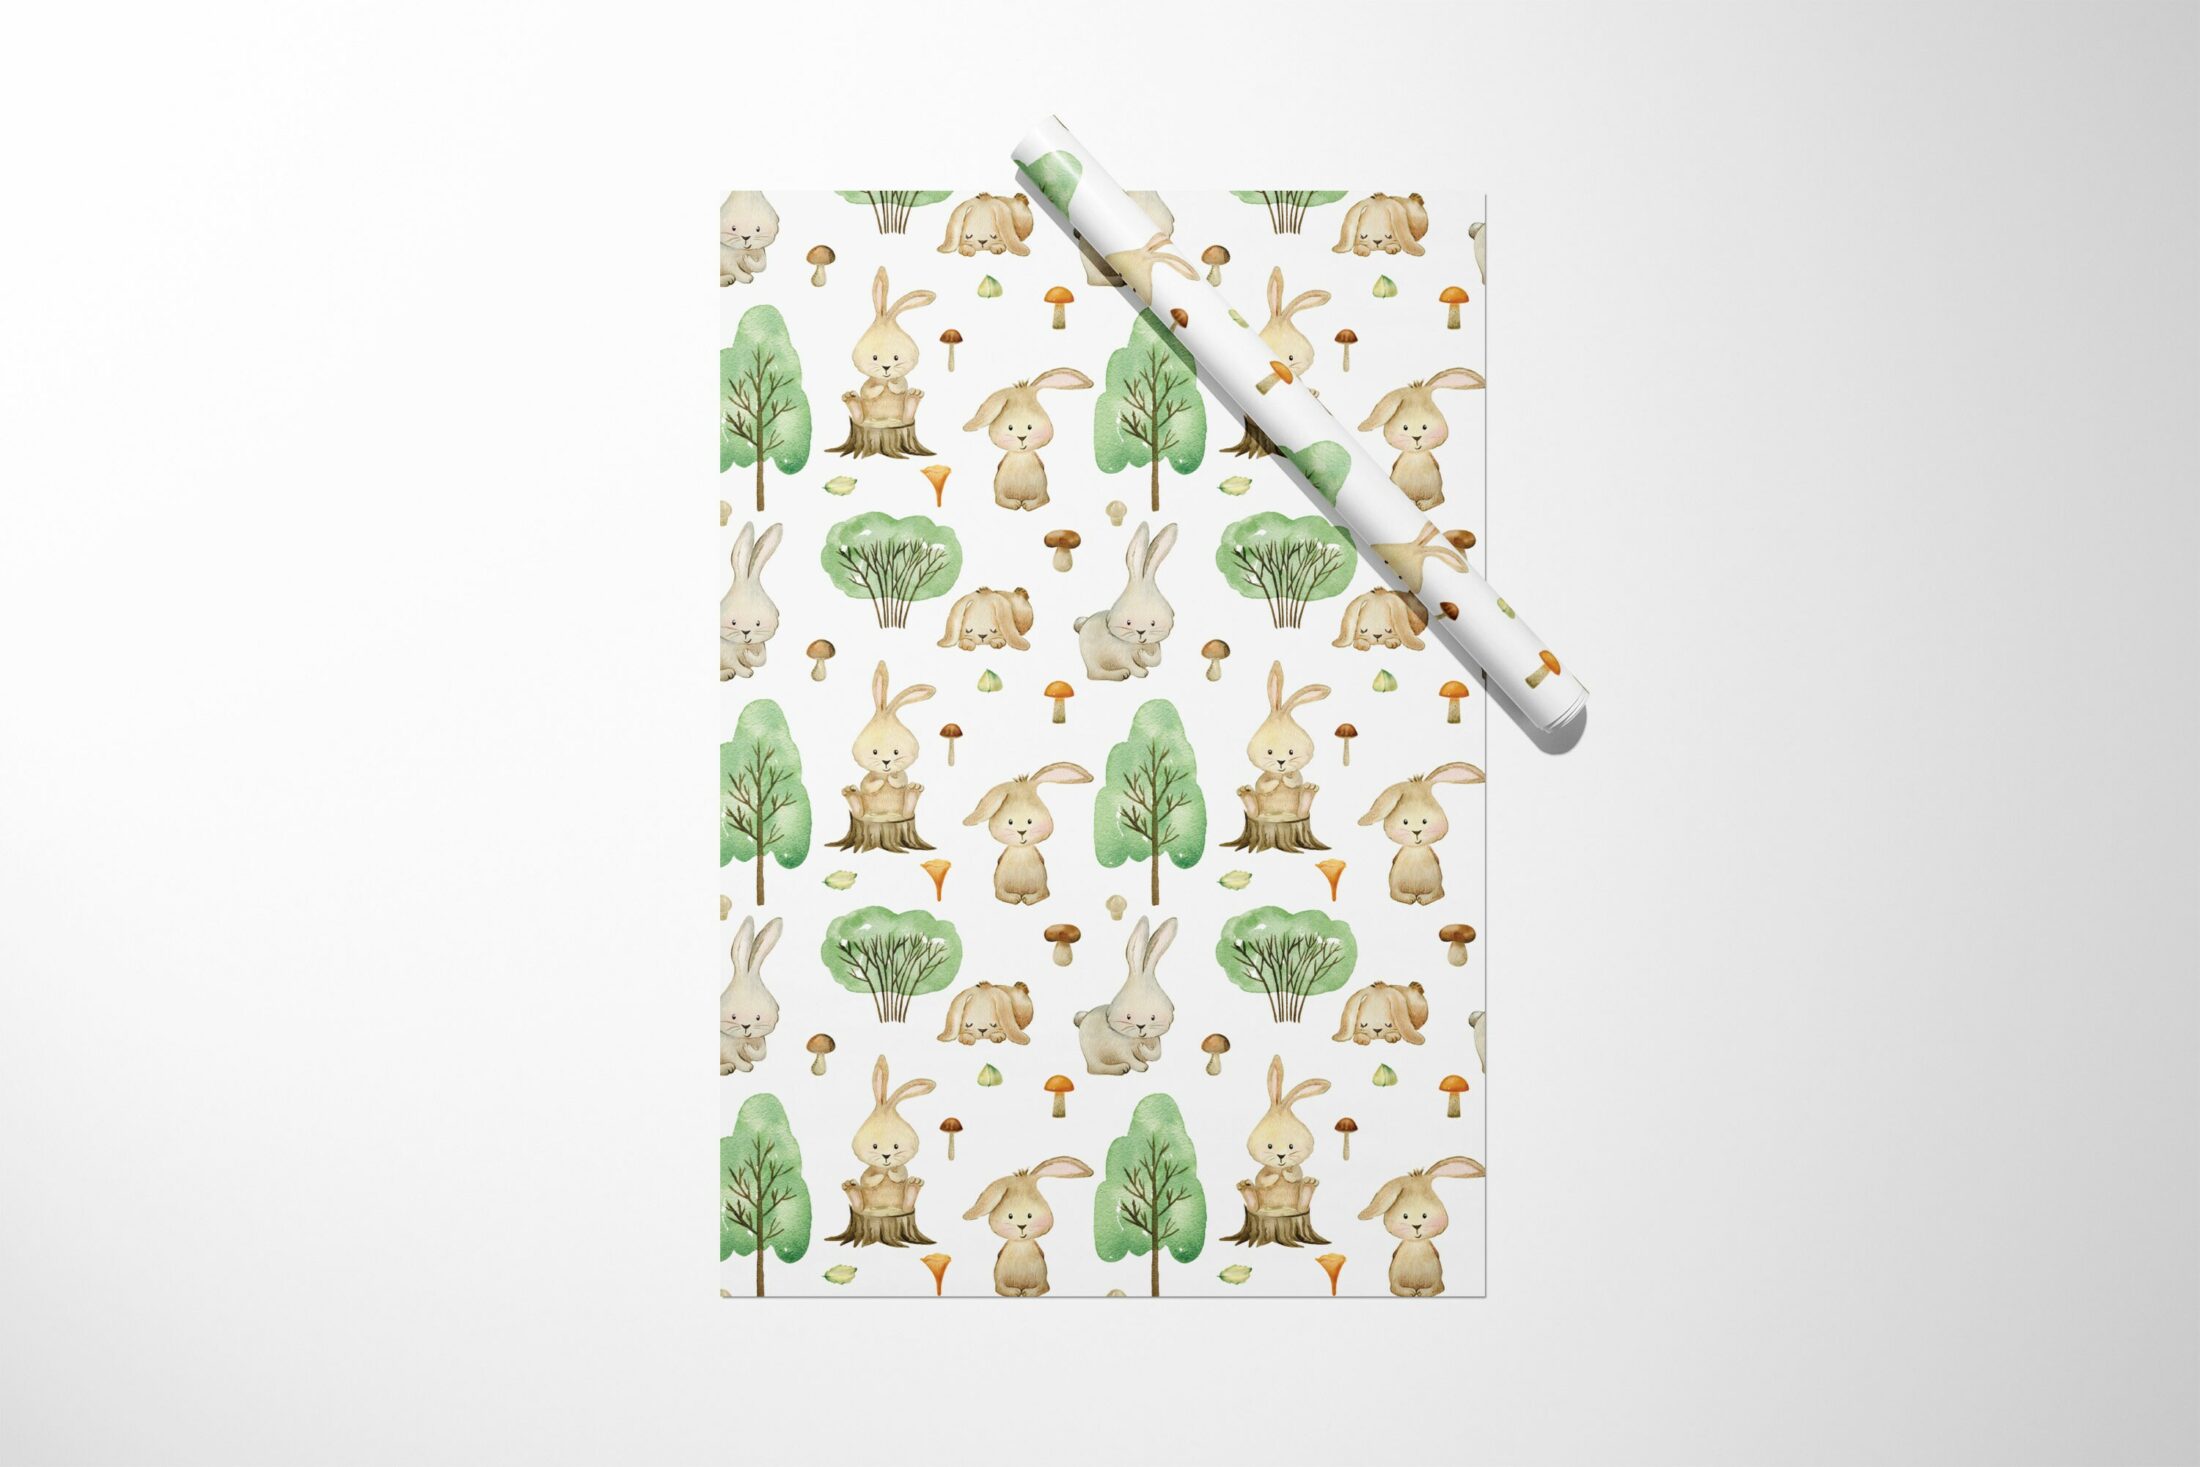 A Bunny and Forest Wrapping Paper with giraffes and trees on it.